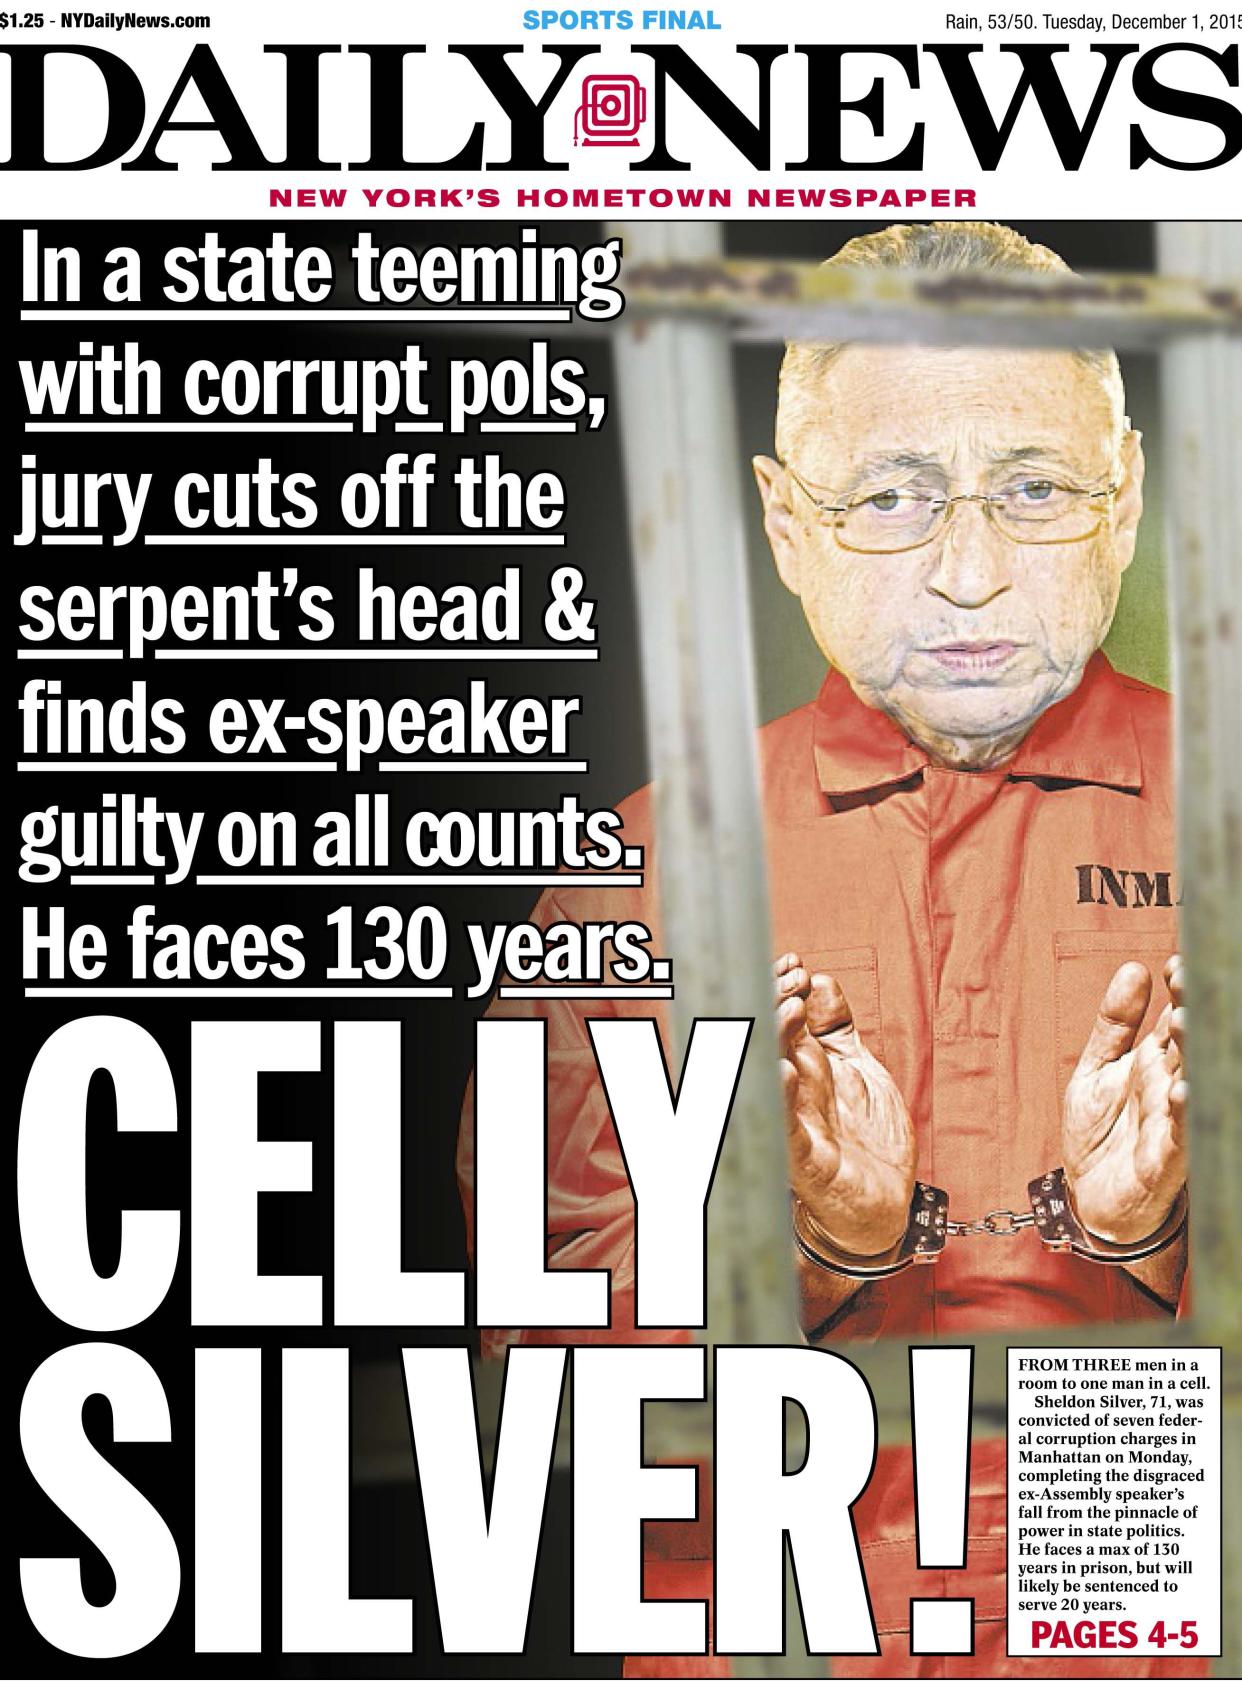 Front page of the New York Daily News for Dec. 1, 2015, after Sheldon Silver was found guilty on corruption charges. Headline: "Celly Silver!"